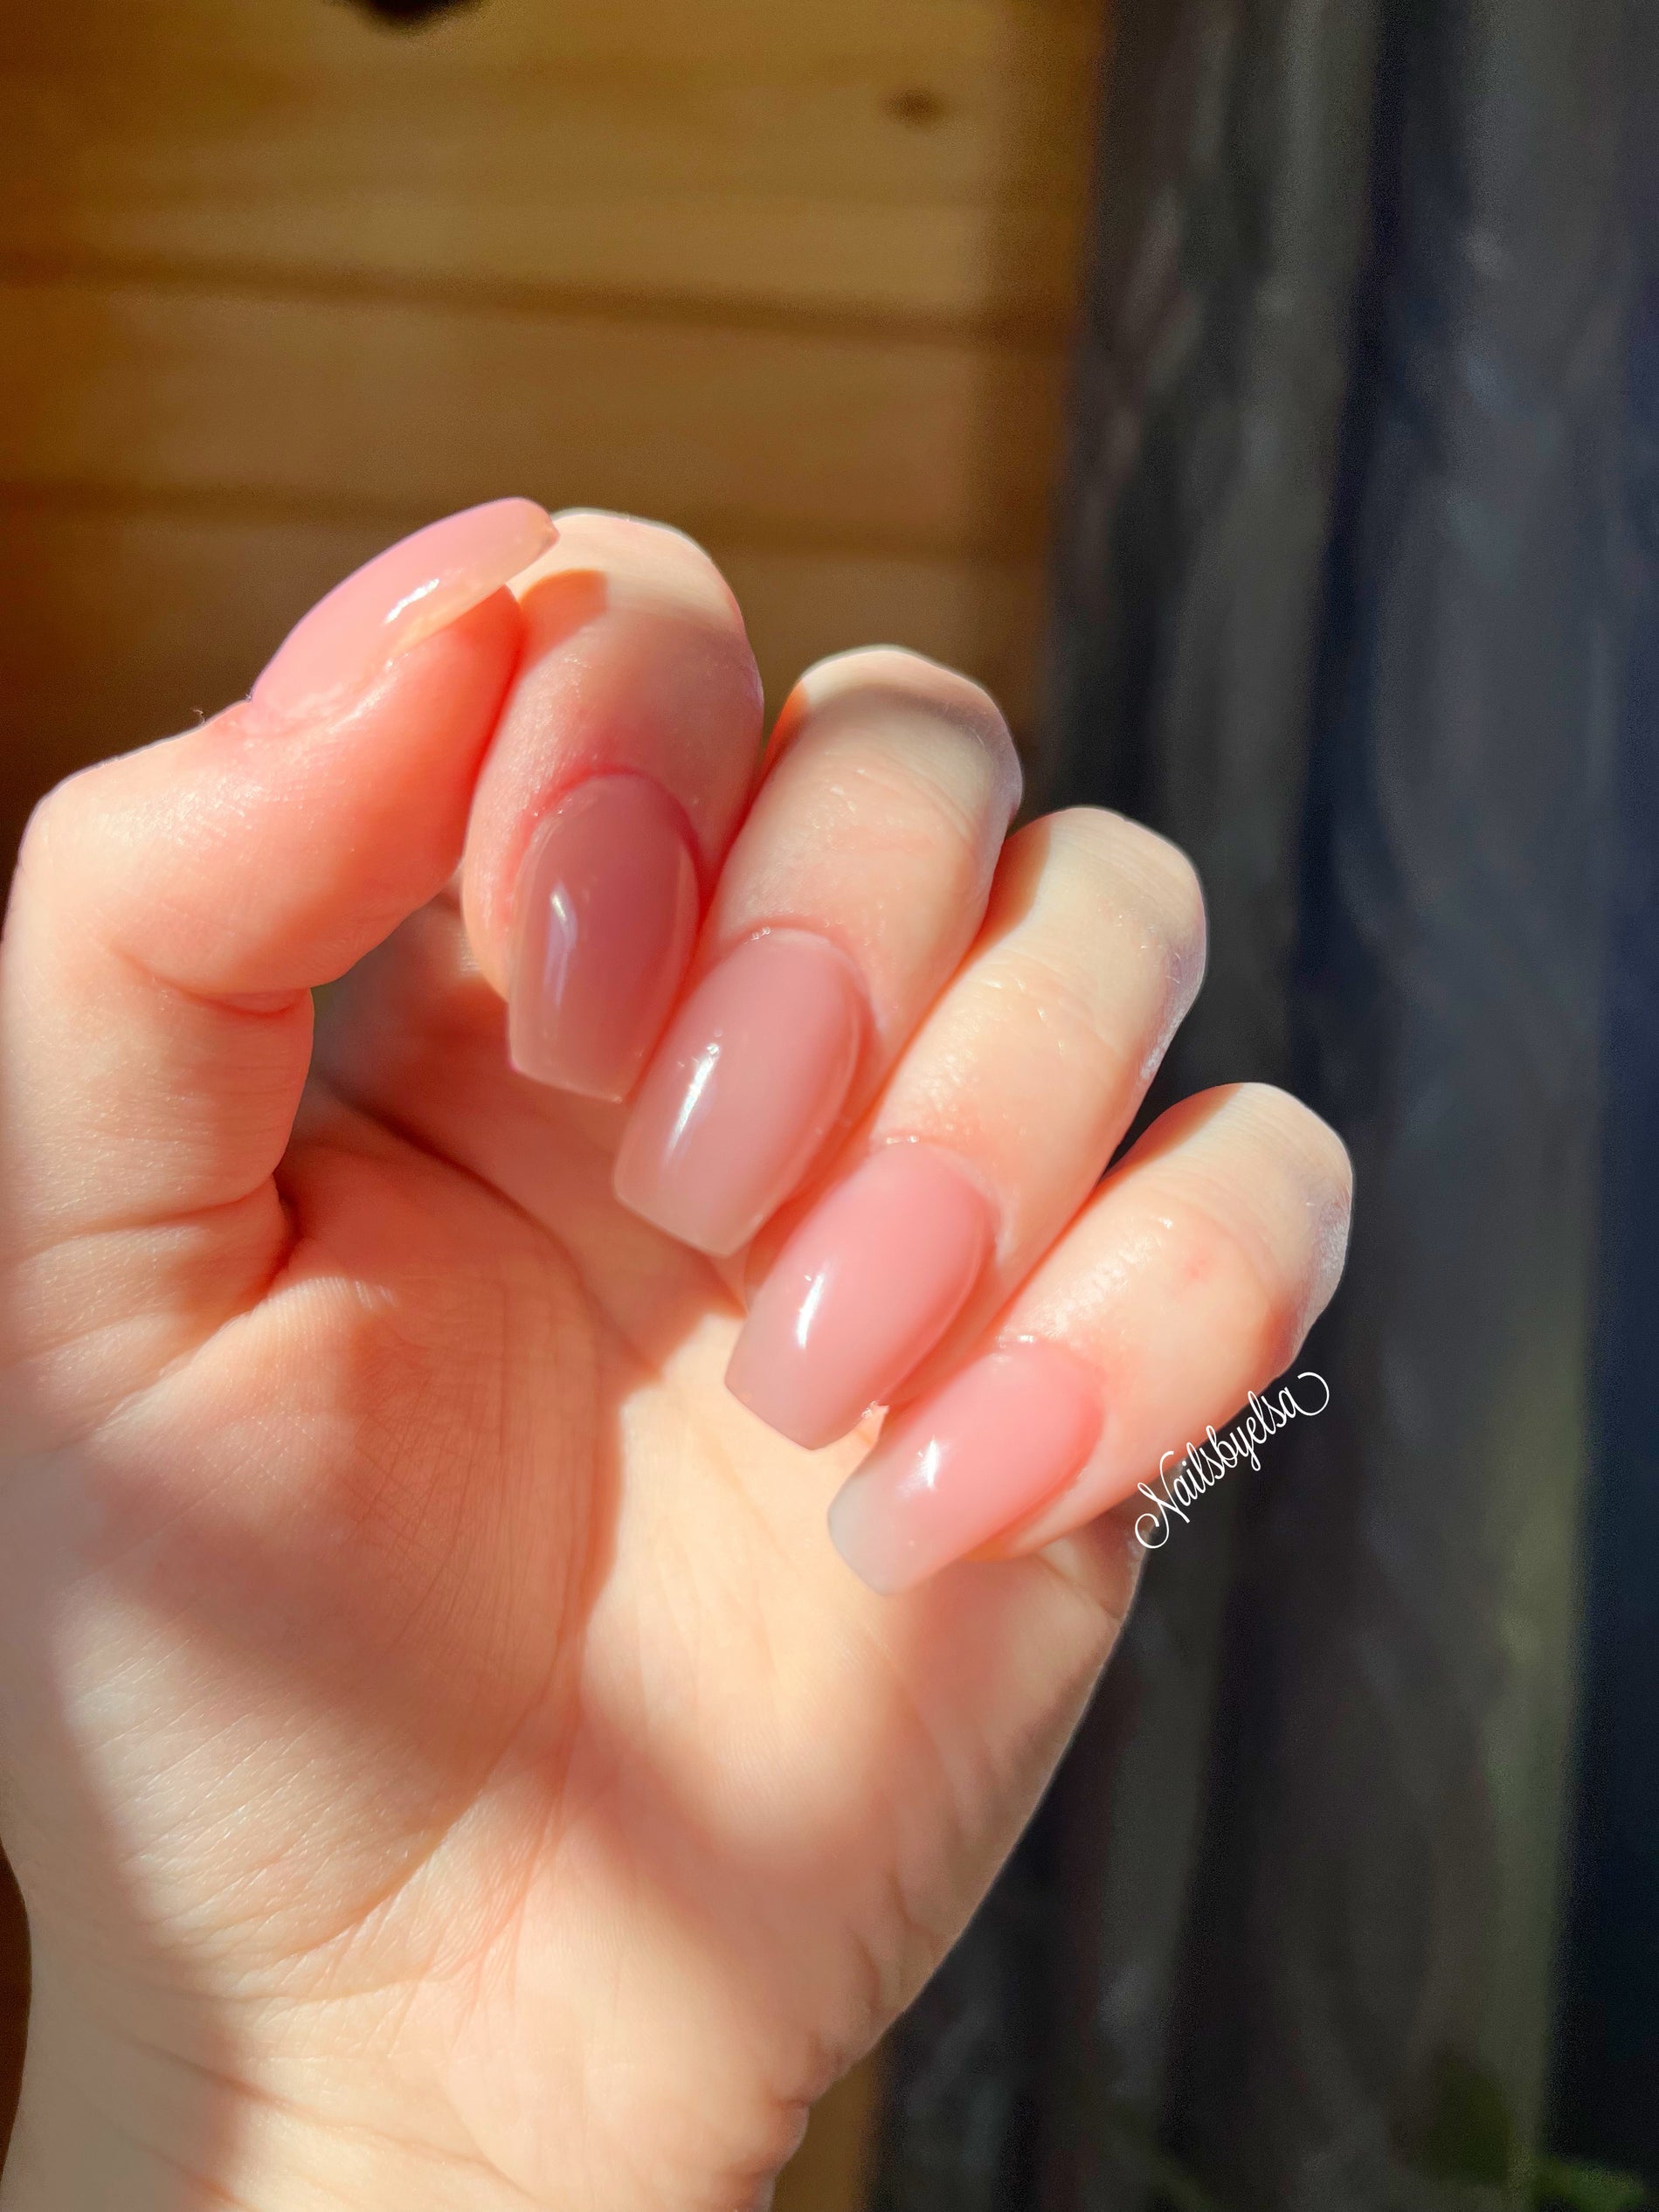 Makeout-side - Pink Nail Lacquer | OPI